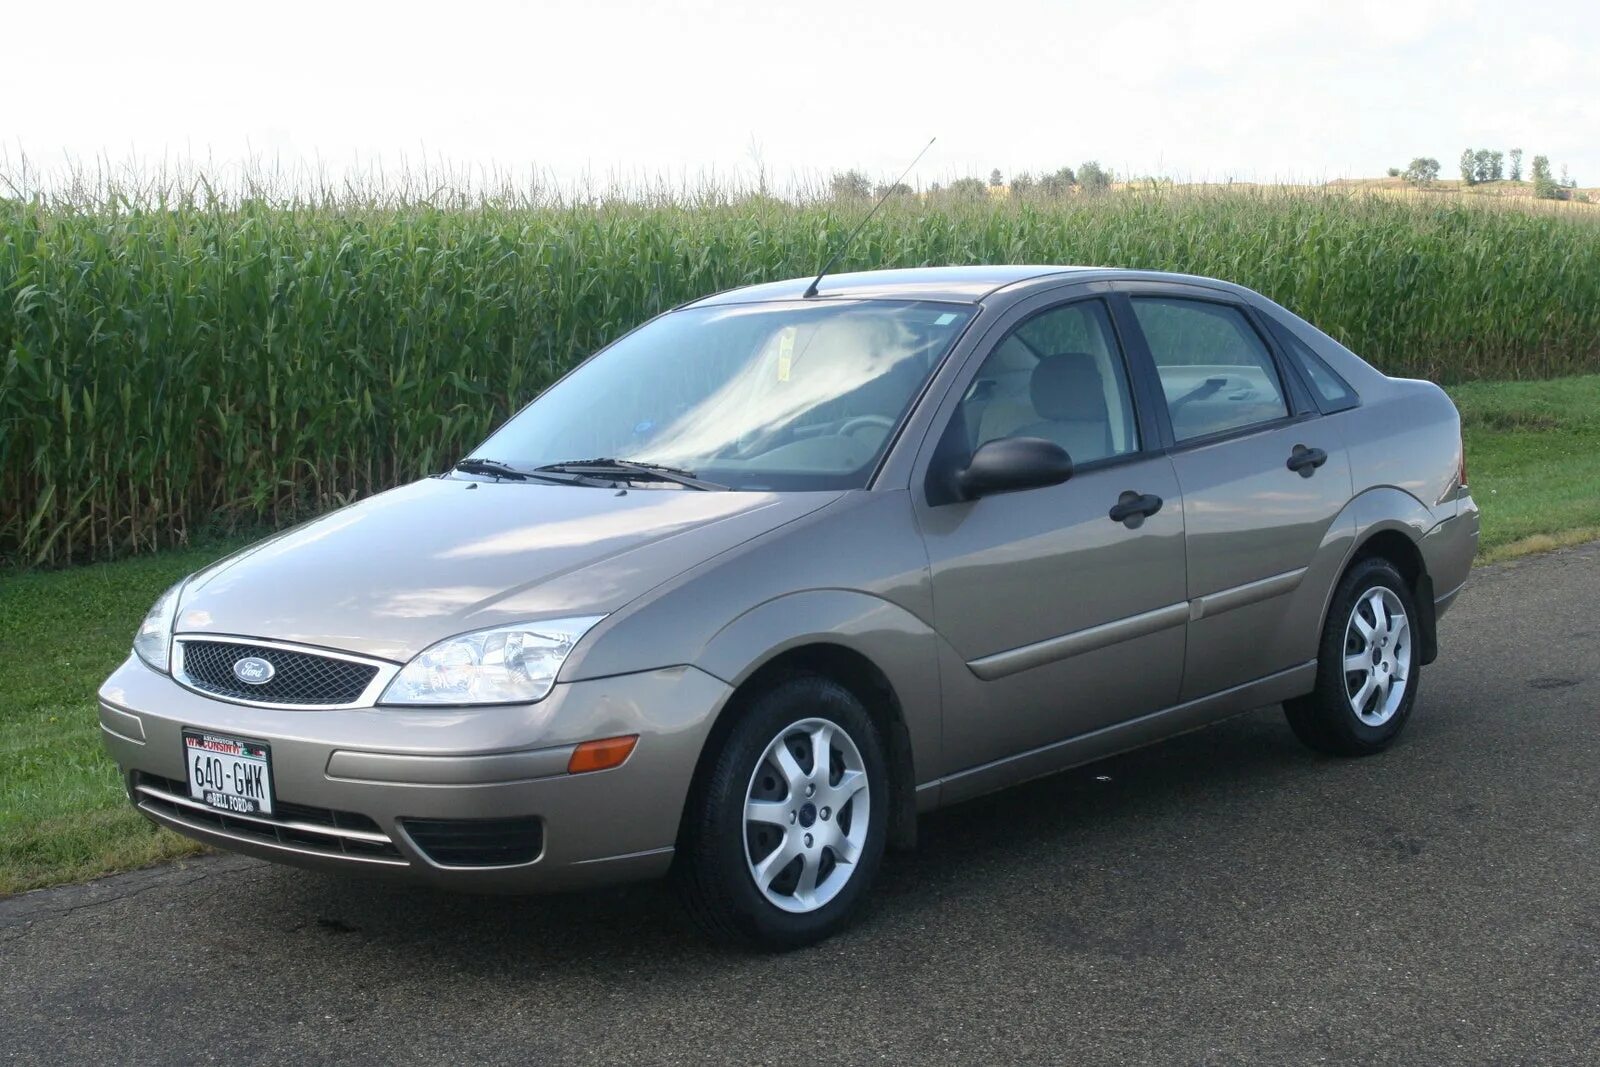 Форд 2005 г. Ford Focus se zx4. Фокус 1 zx4. Ford Focus 2005 zx4 zx5. Форд фокус 1 2005 года.